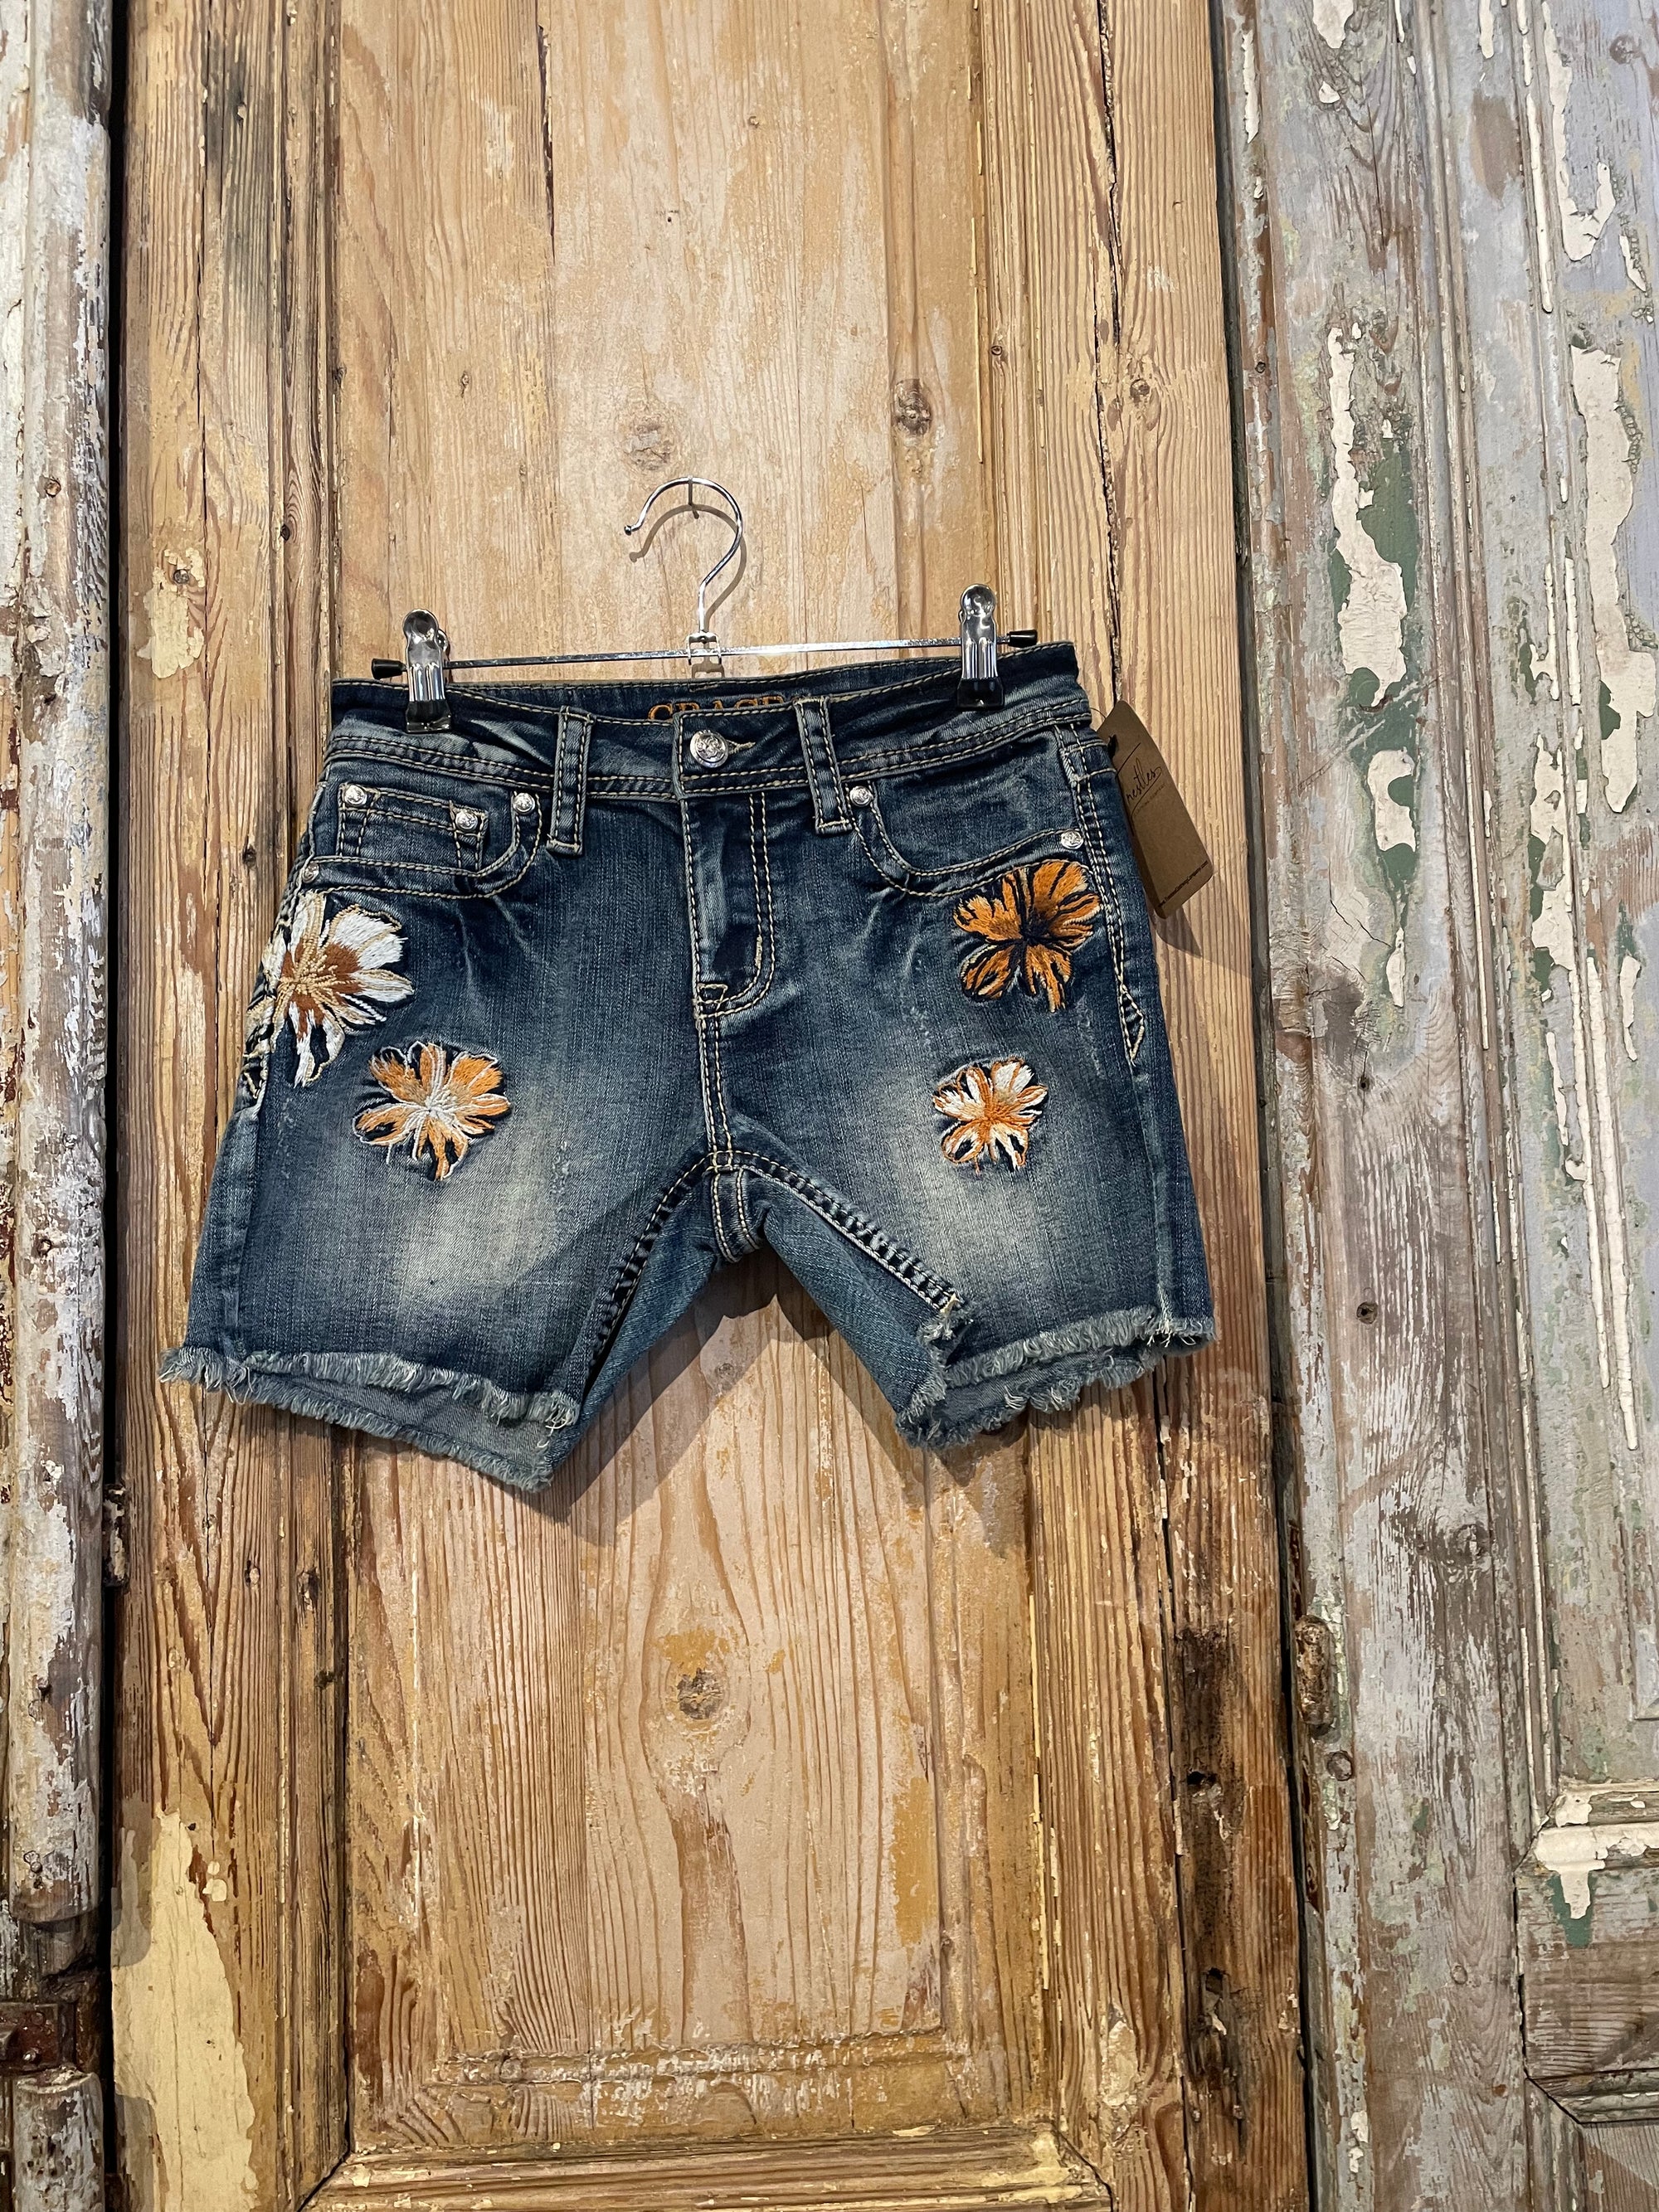 Floral Embroidery Shorts